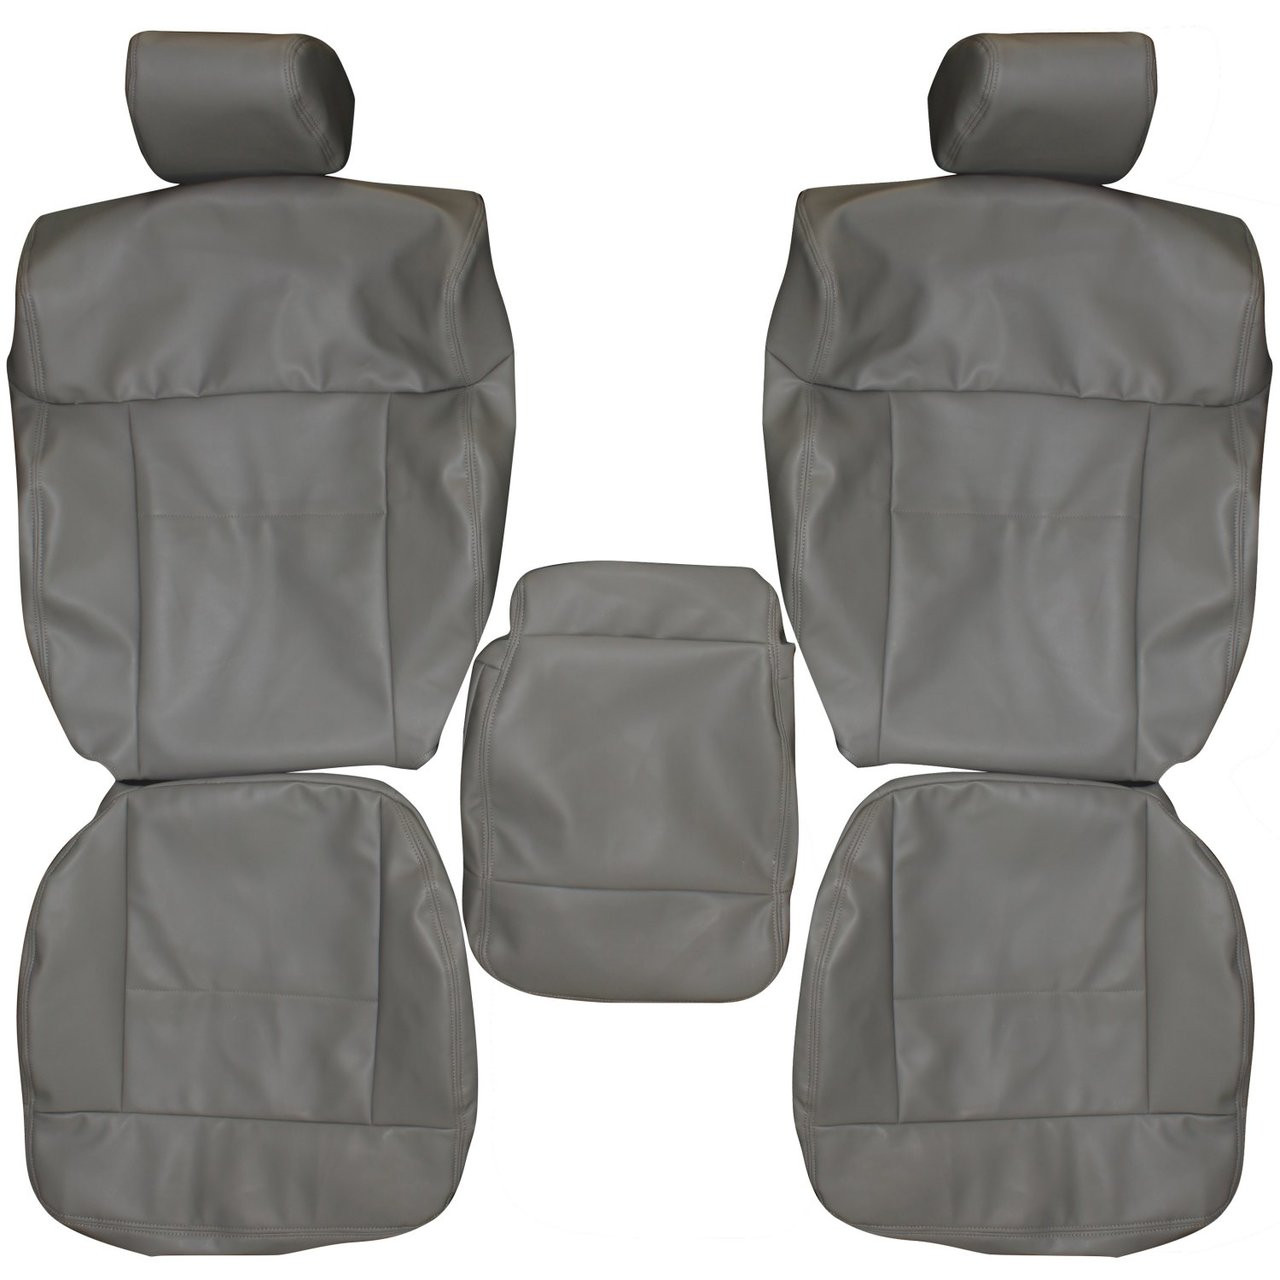 2004-2008 Ford F150 Custom Real Leather Seat Covers (Front) - Lseat.com